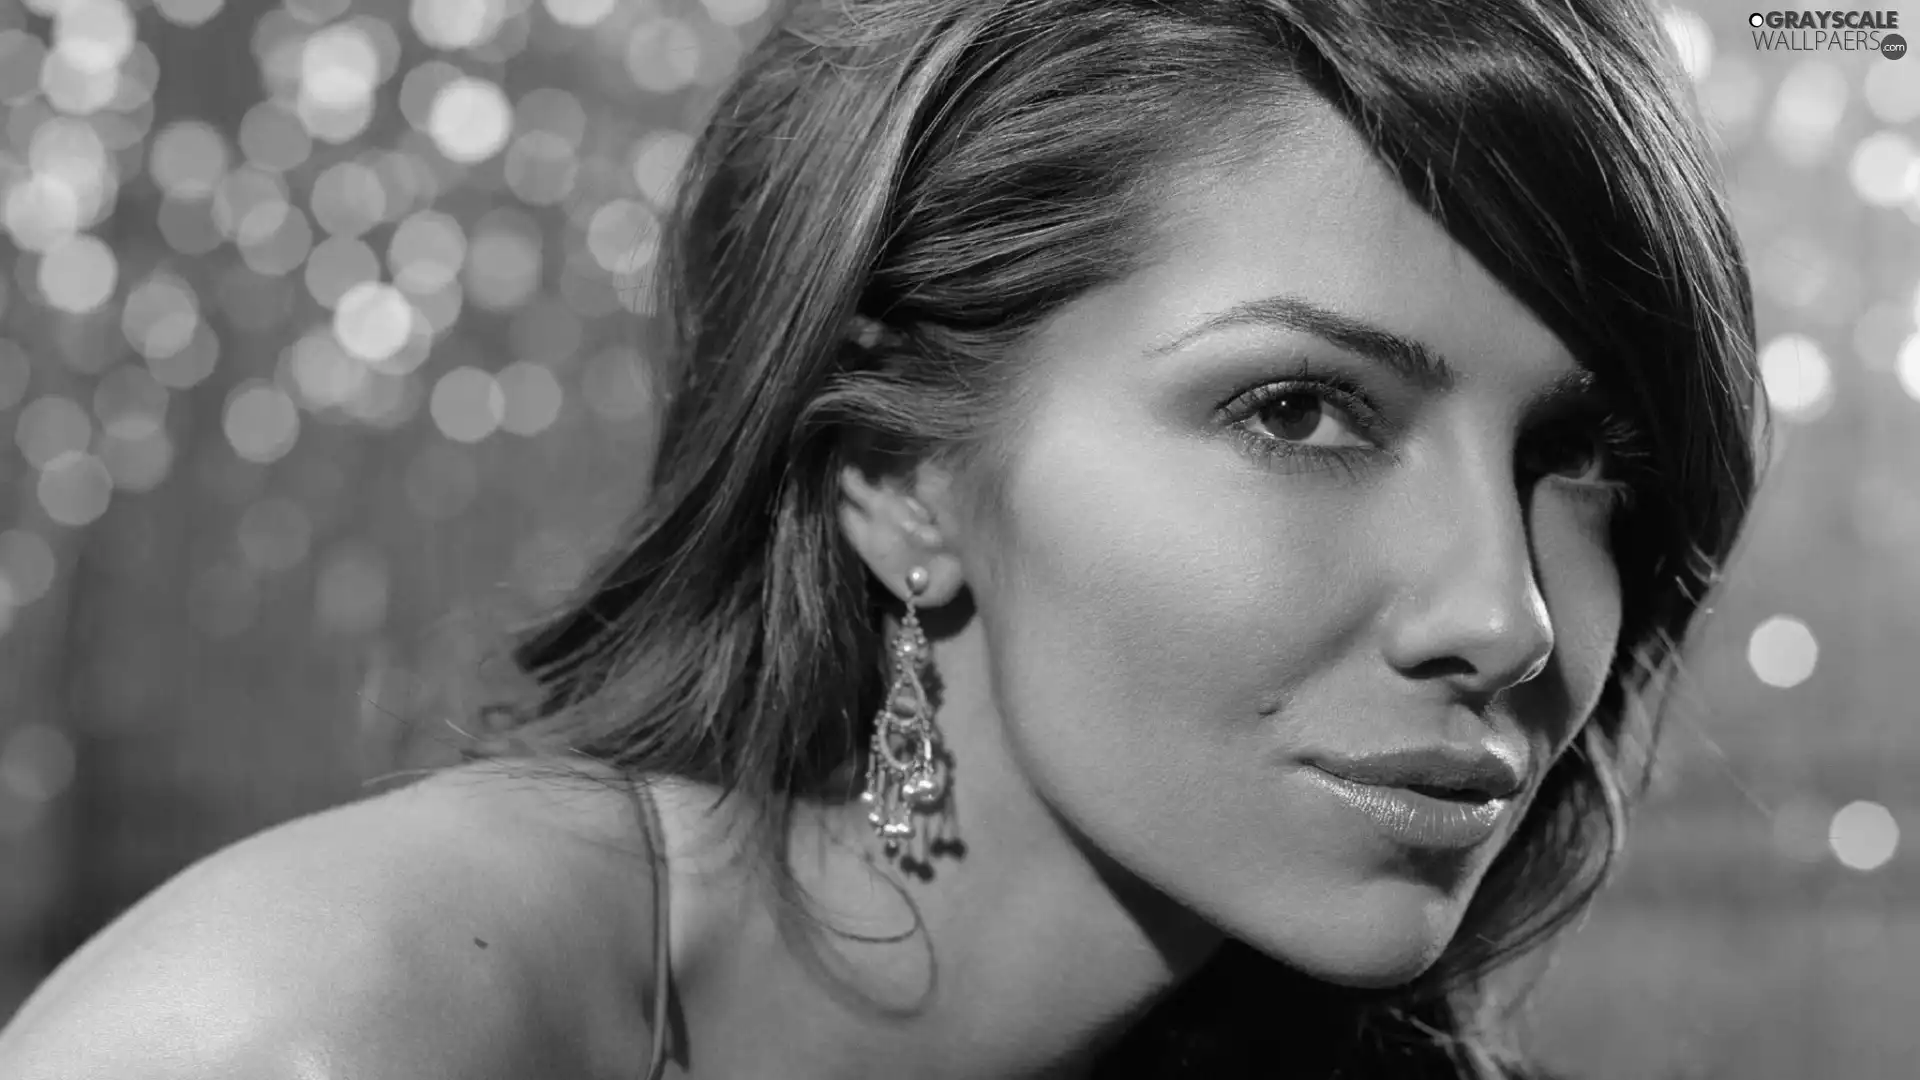 make-up, The look, Women, ear-ring, Vanessa Marcil